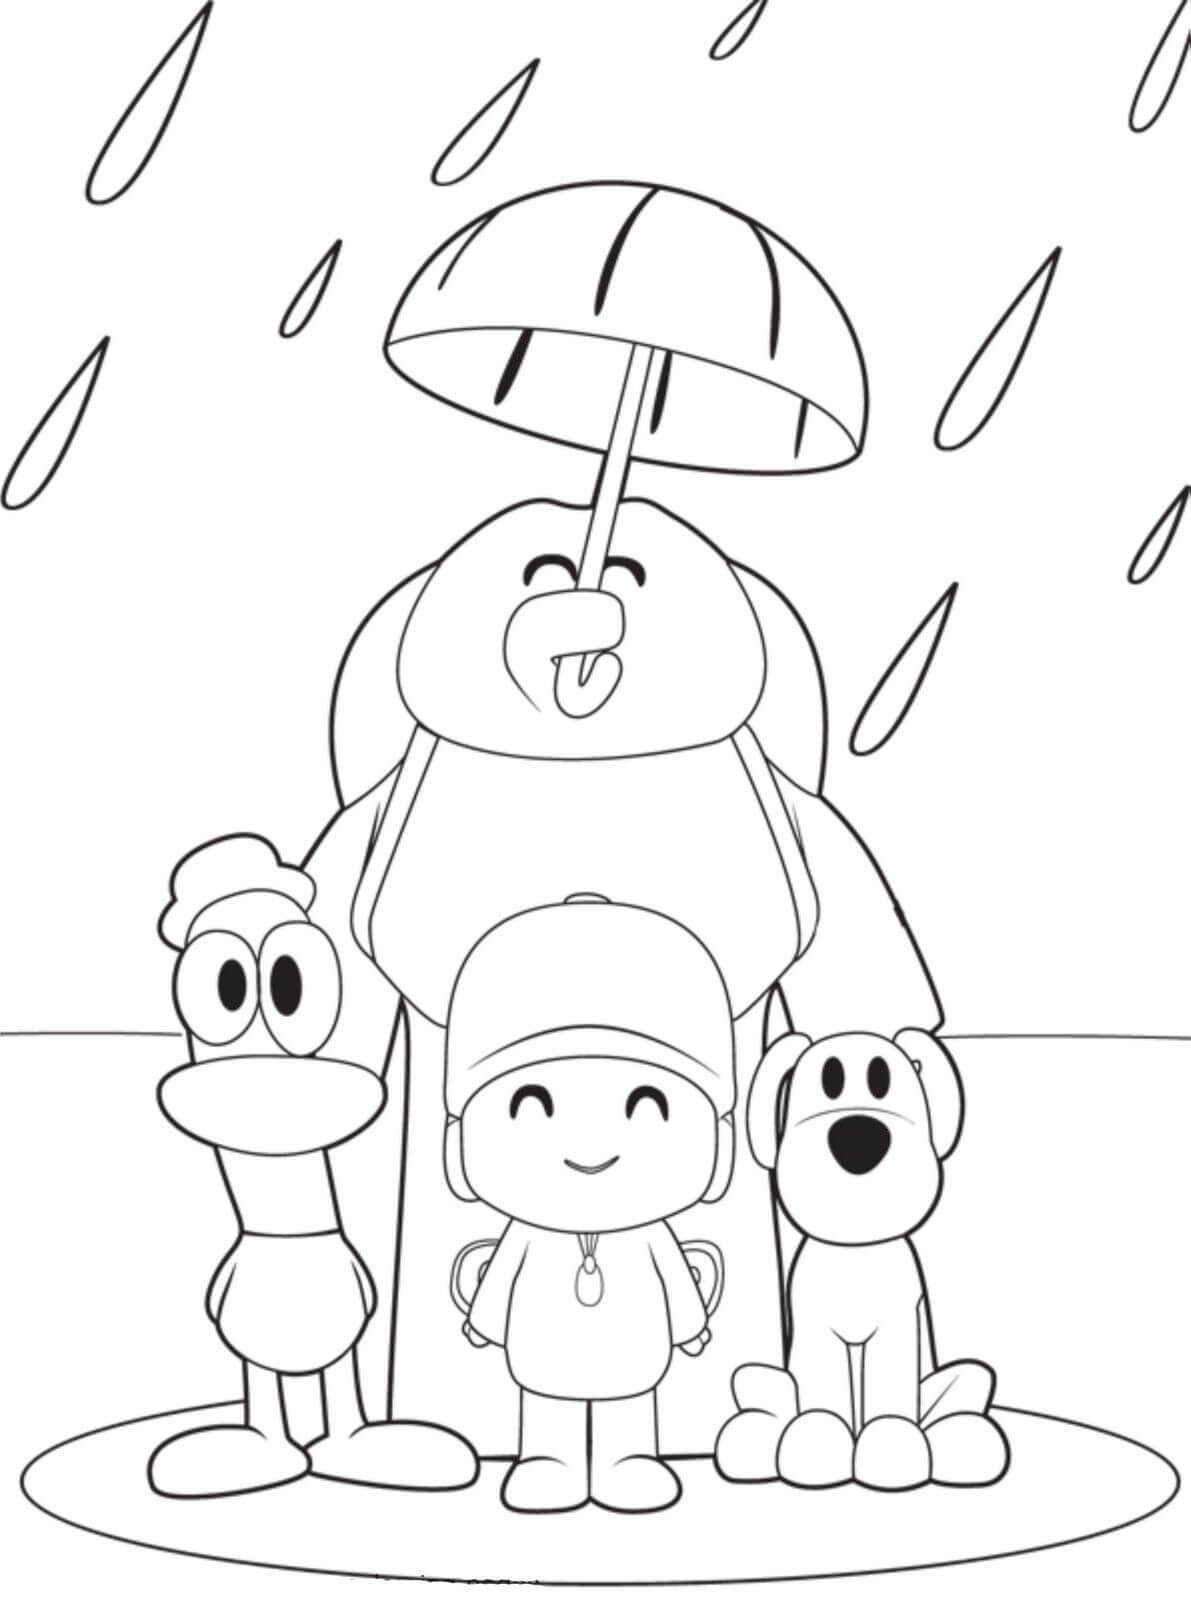 Pocoyo And Friends Standing in The Rain para colorir